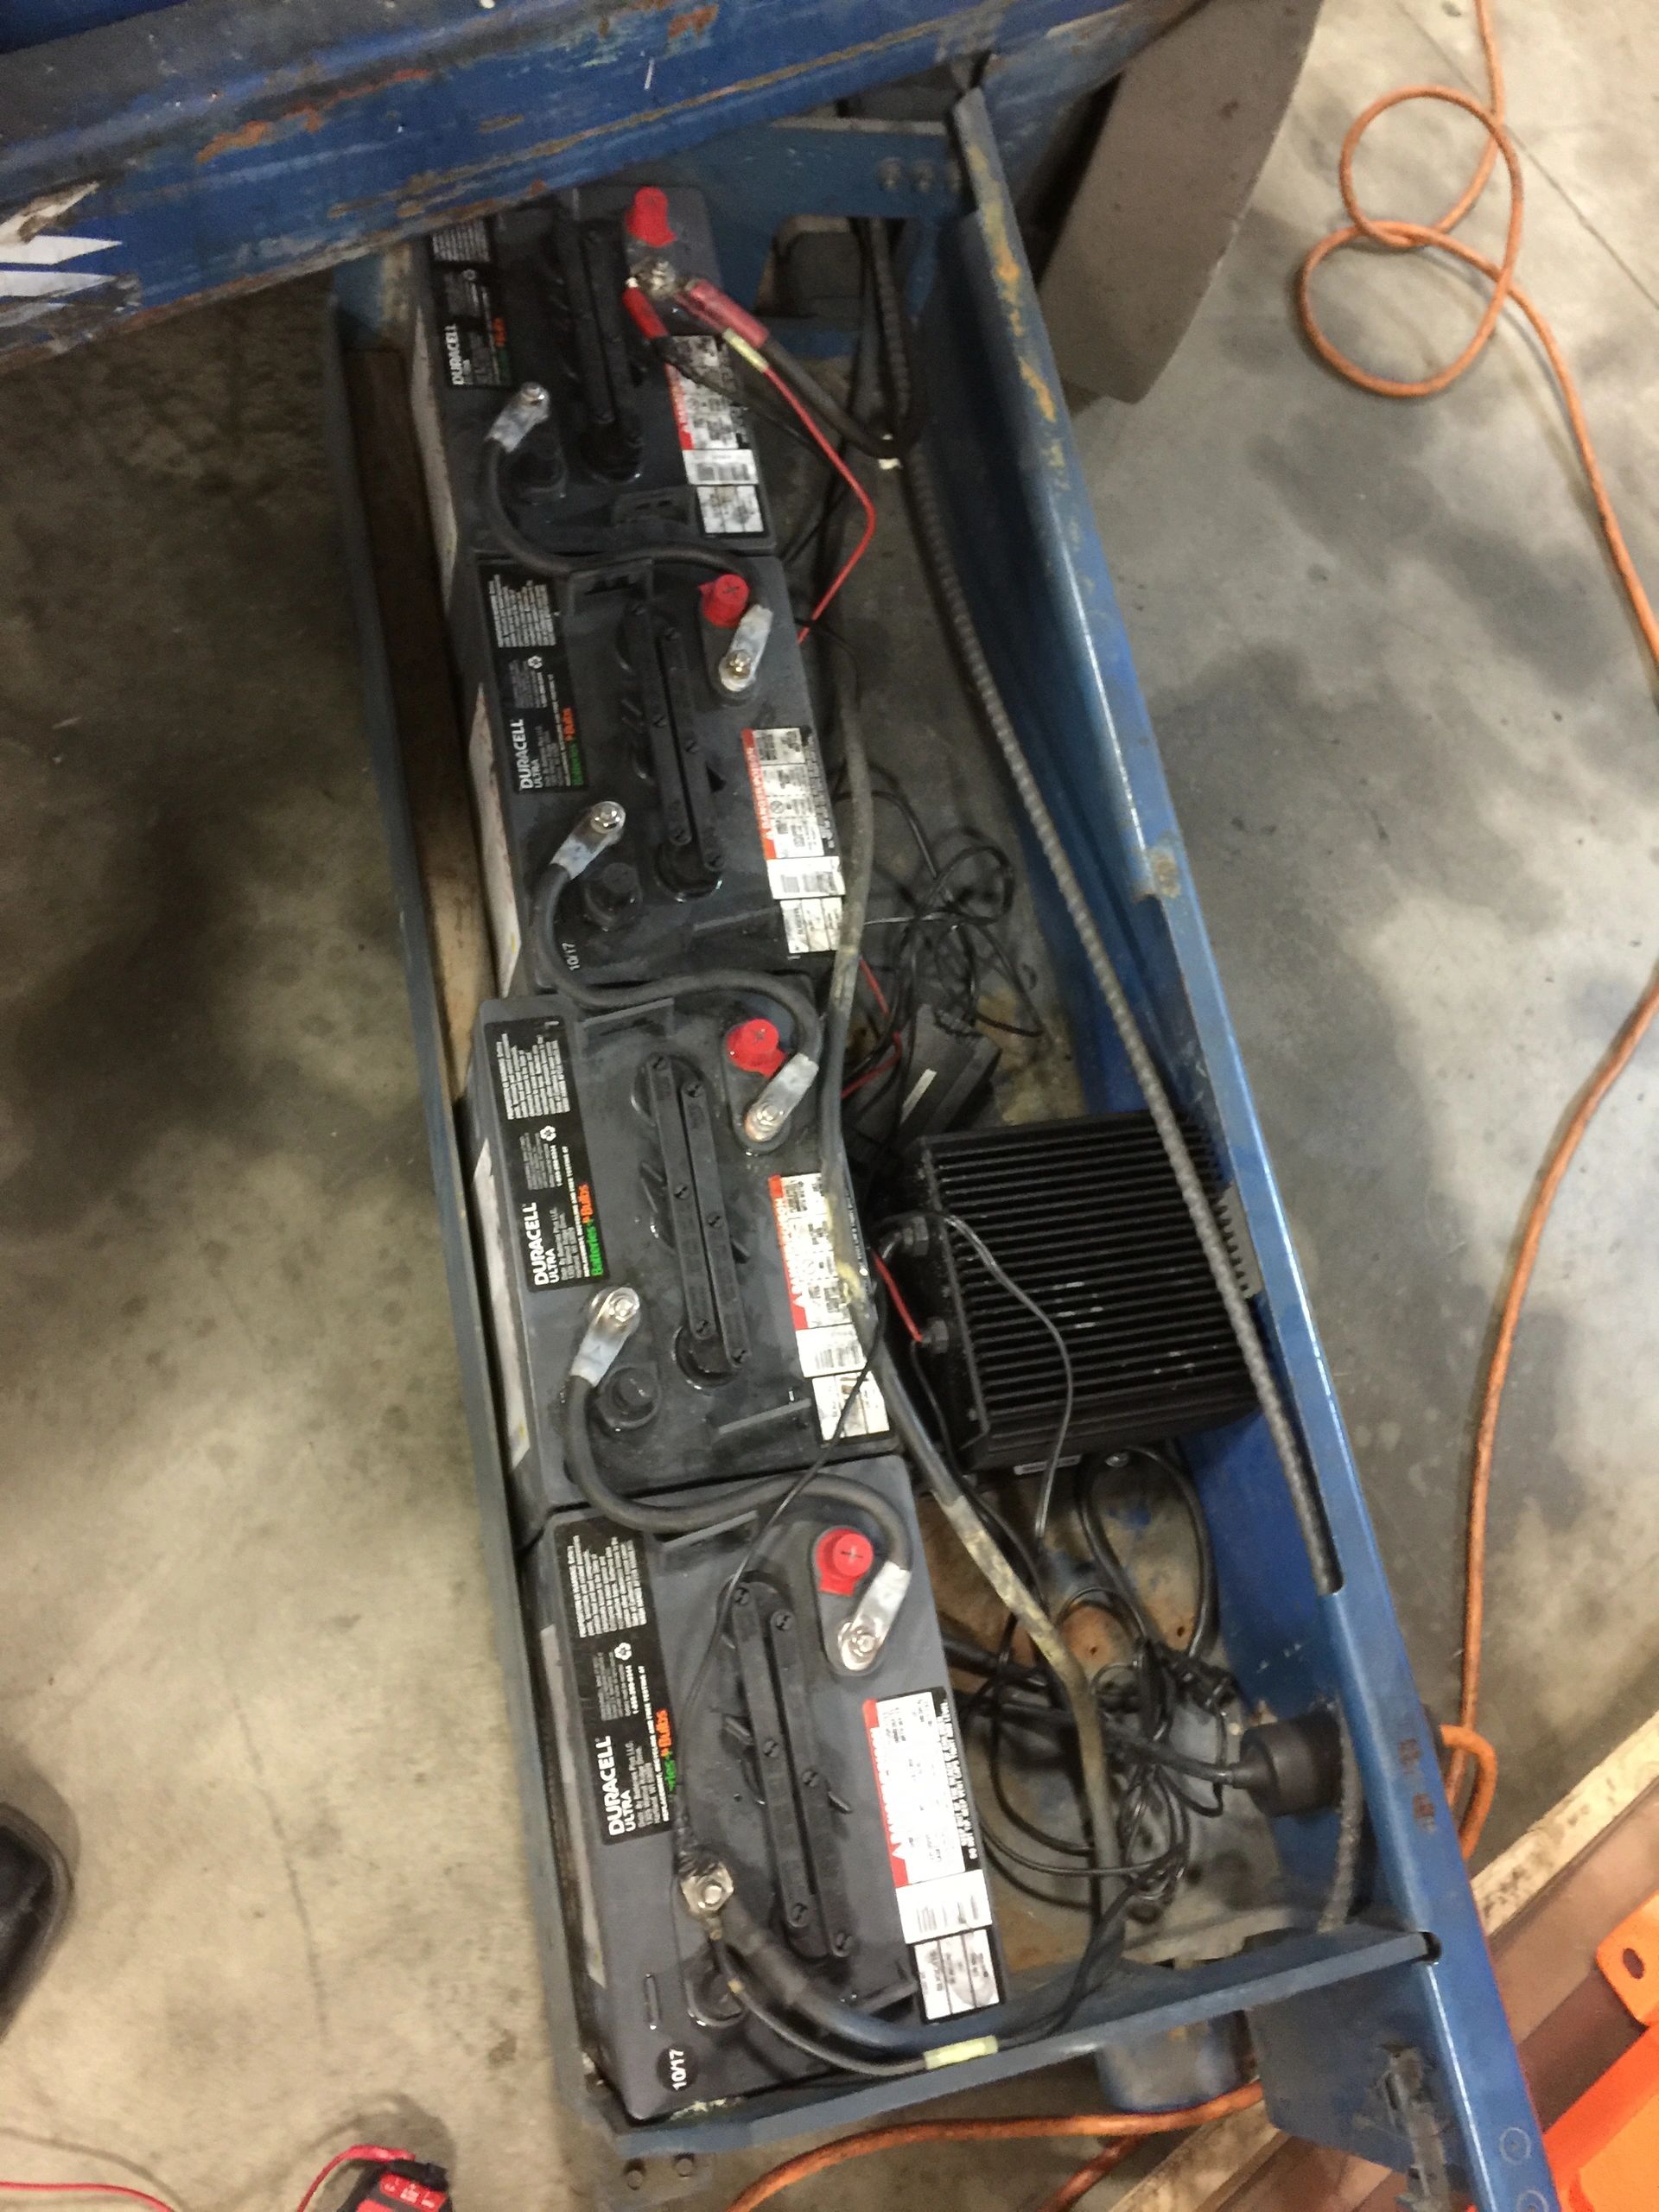 Old Scissor Lift Batteries - Replaced w/ New US2200's 